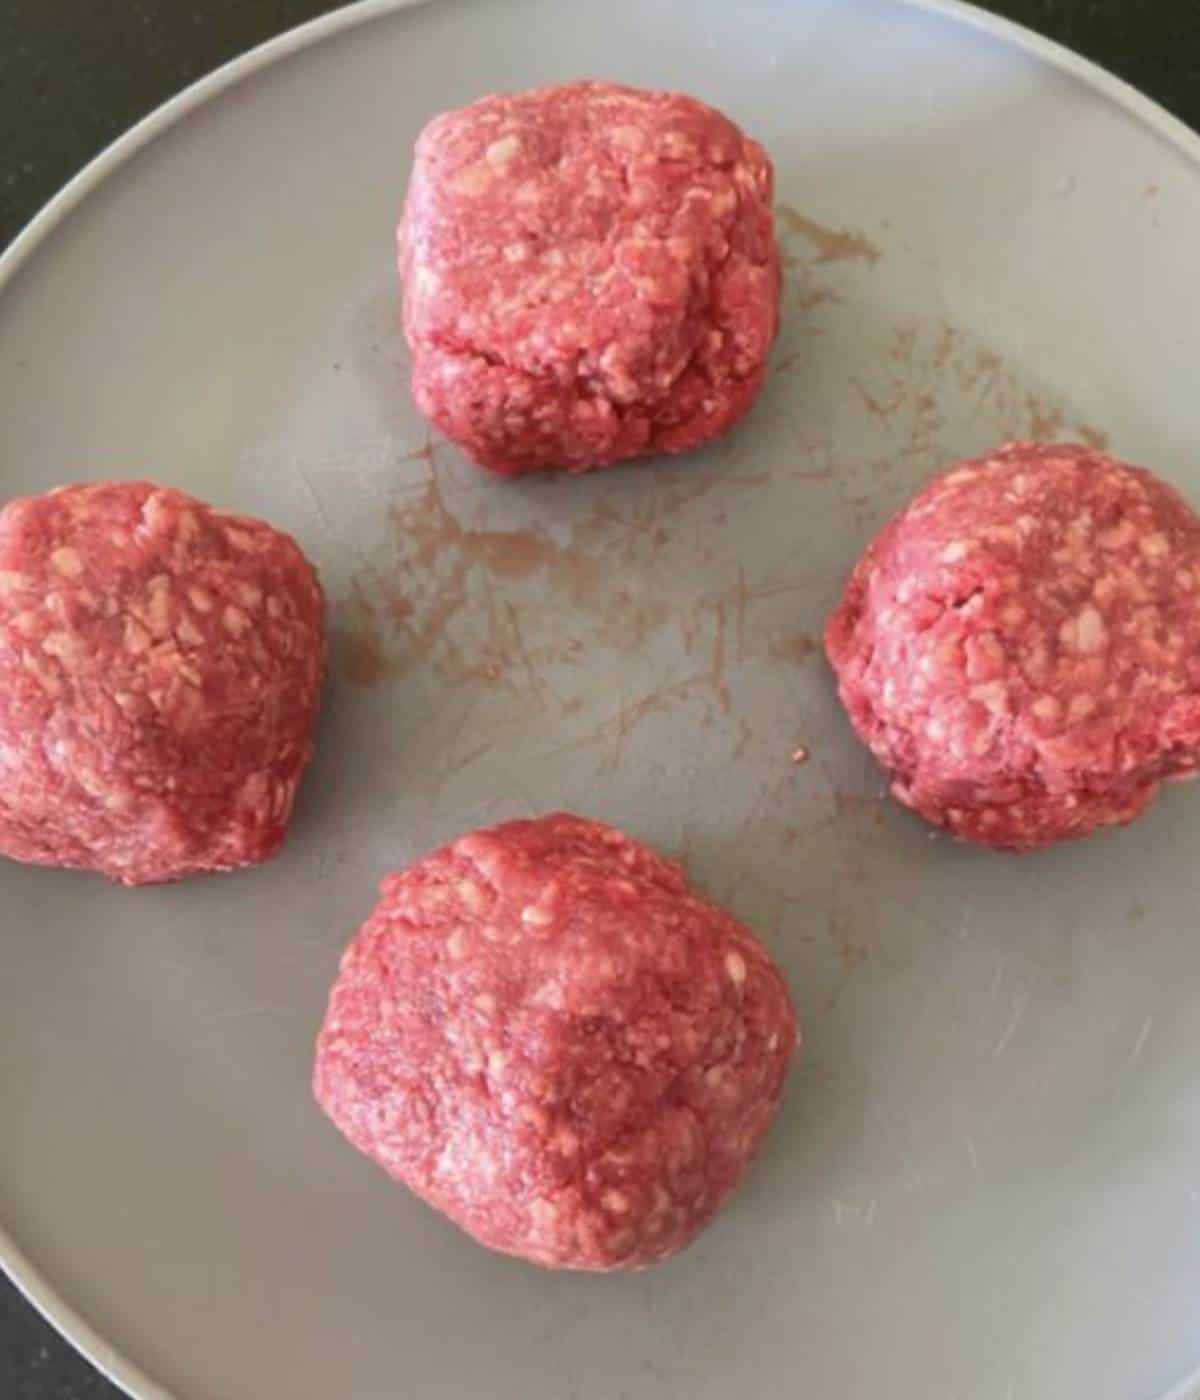 Raw Ground beef balls for Smashburgers on plate. 